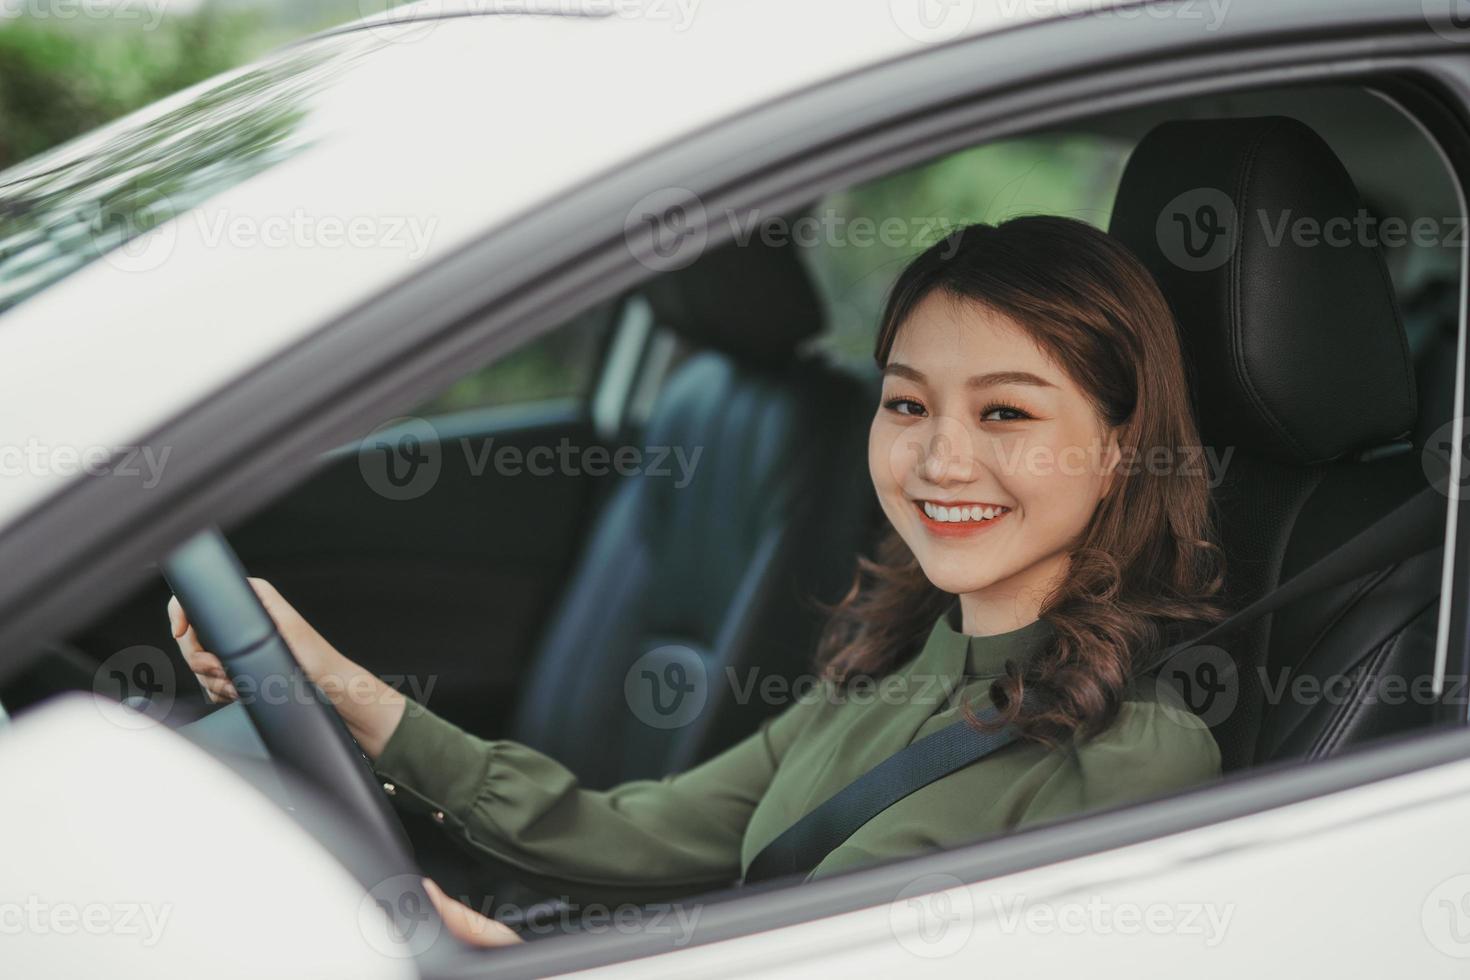 People enjoy laughing transport and relaxed happy woman on road trip vacation concept photo